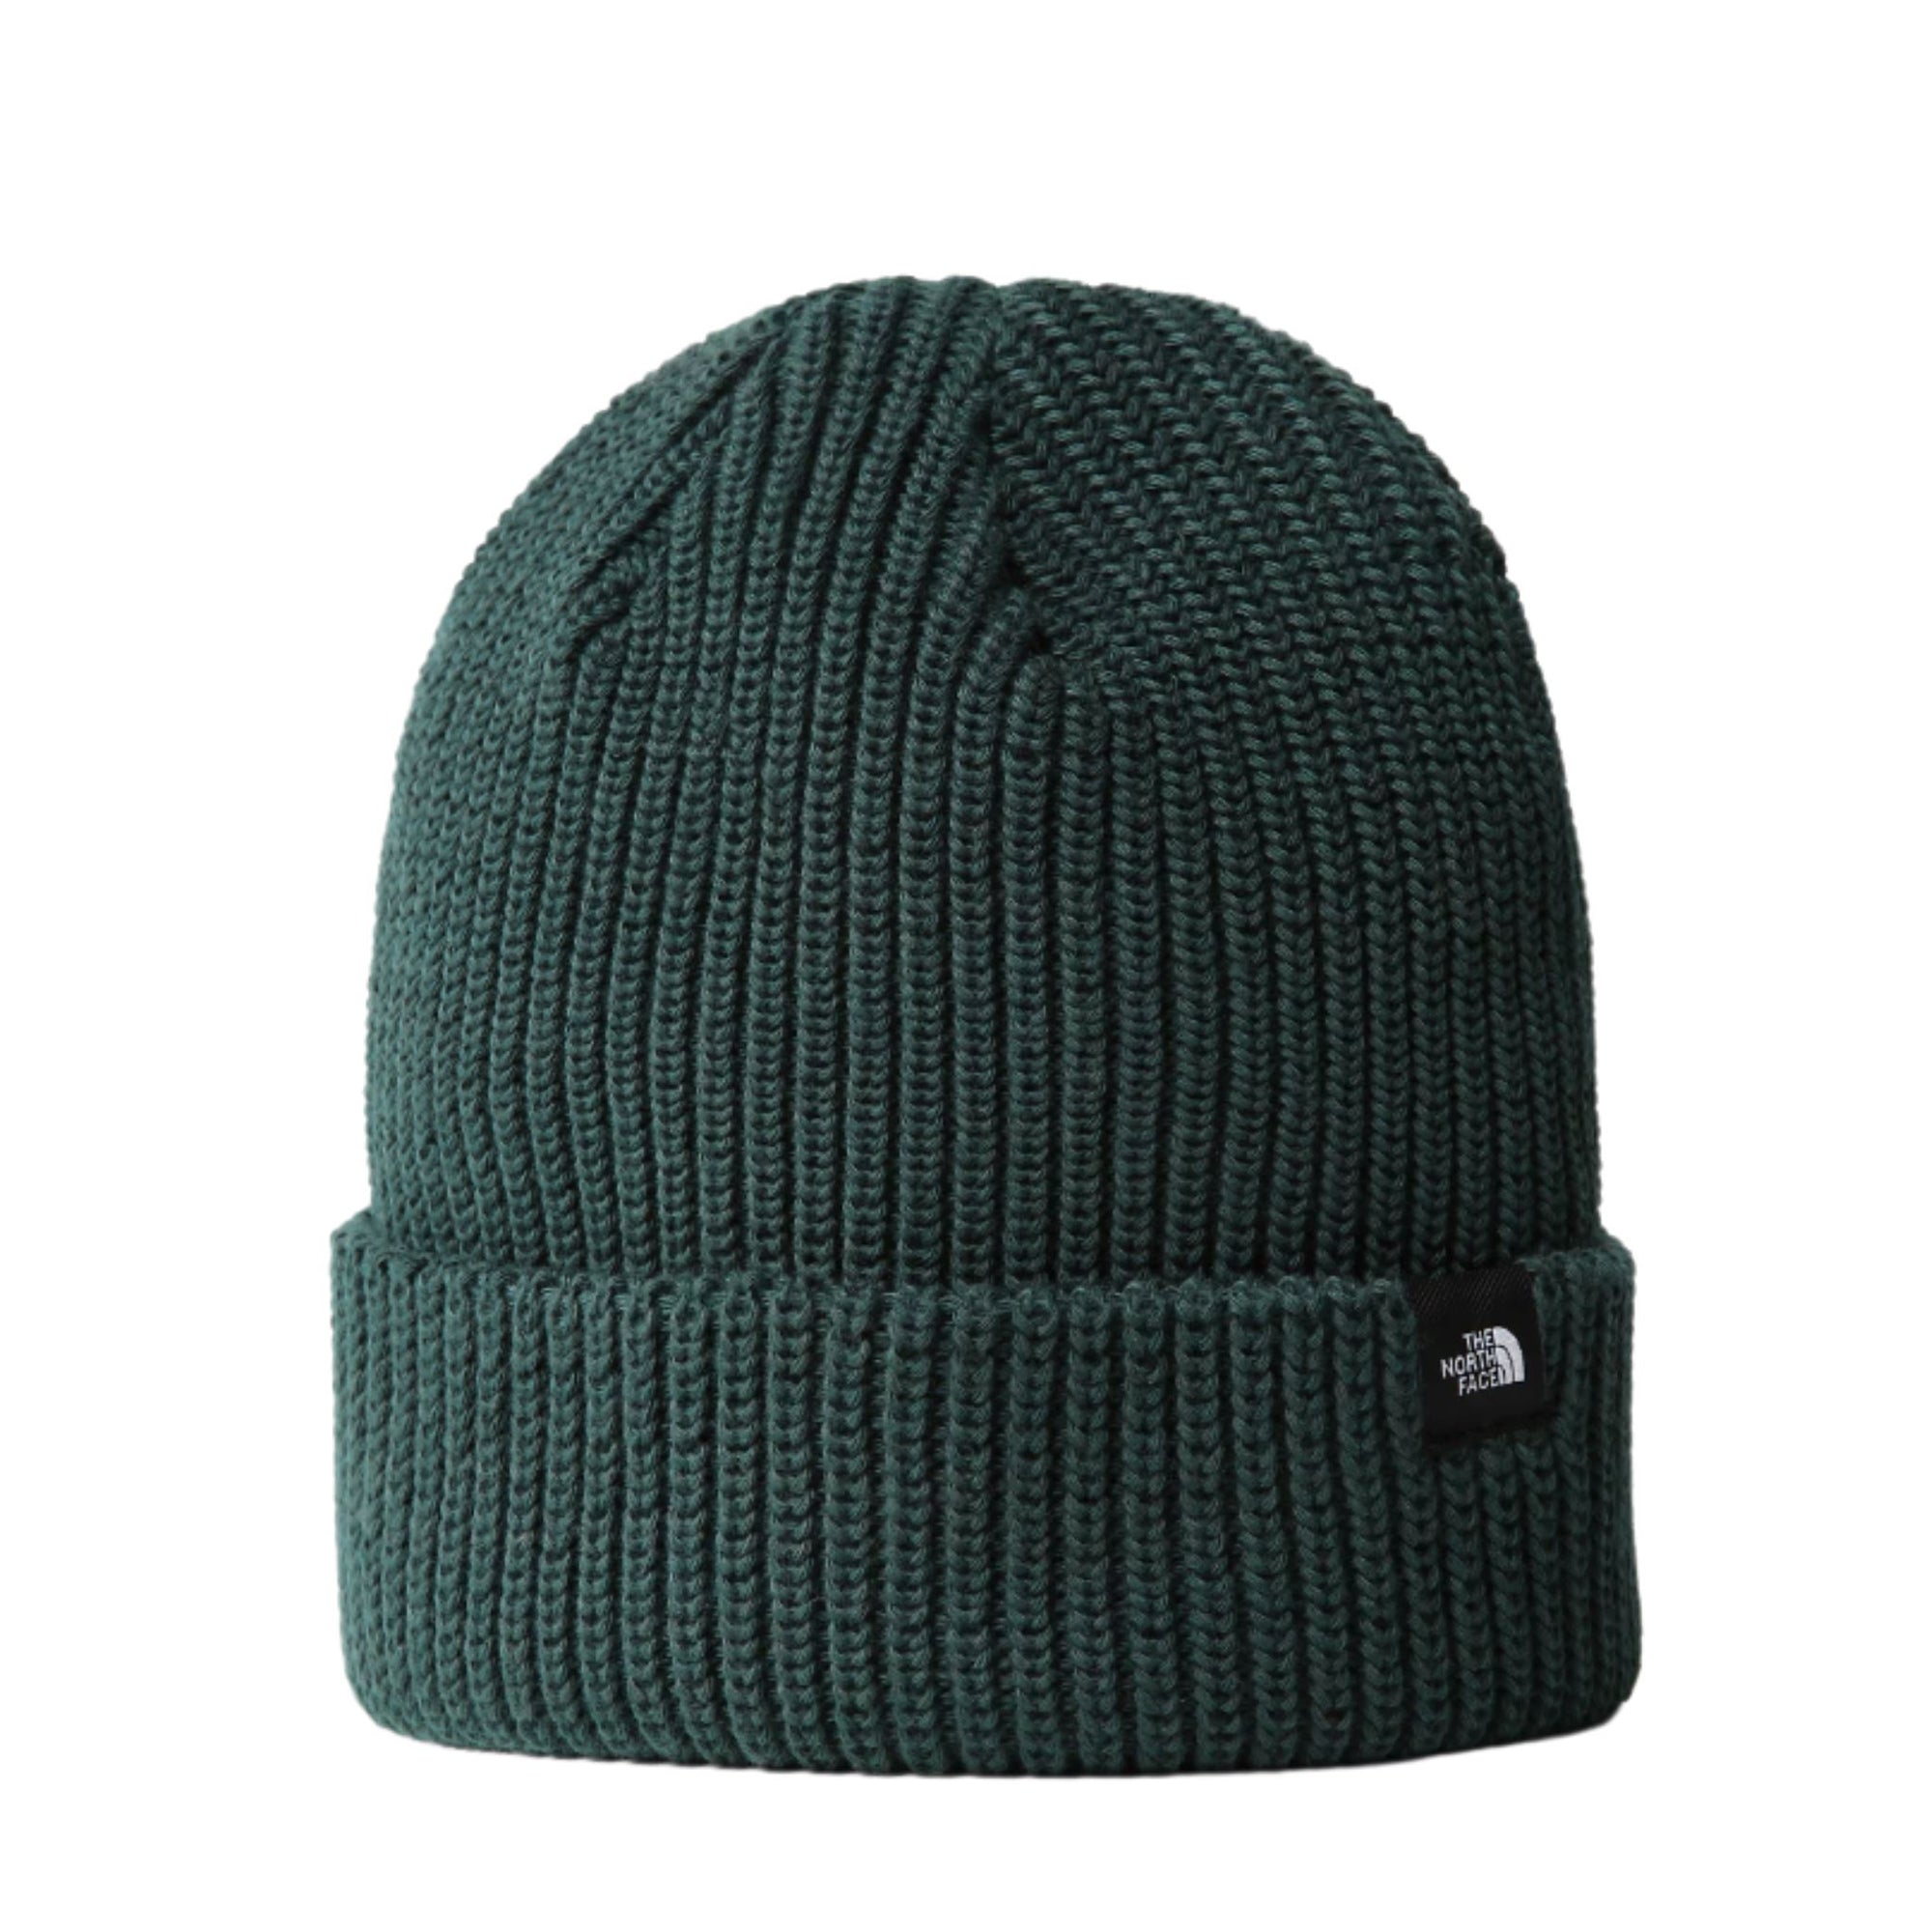 The North Face Fisherman Beanie - Ponderosa Green Dark Heather Beanies The North Face 